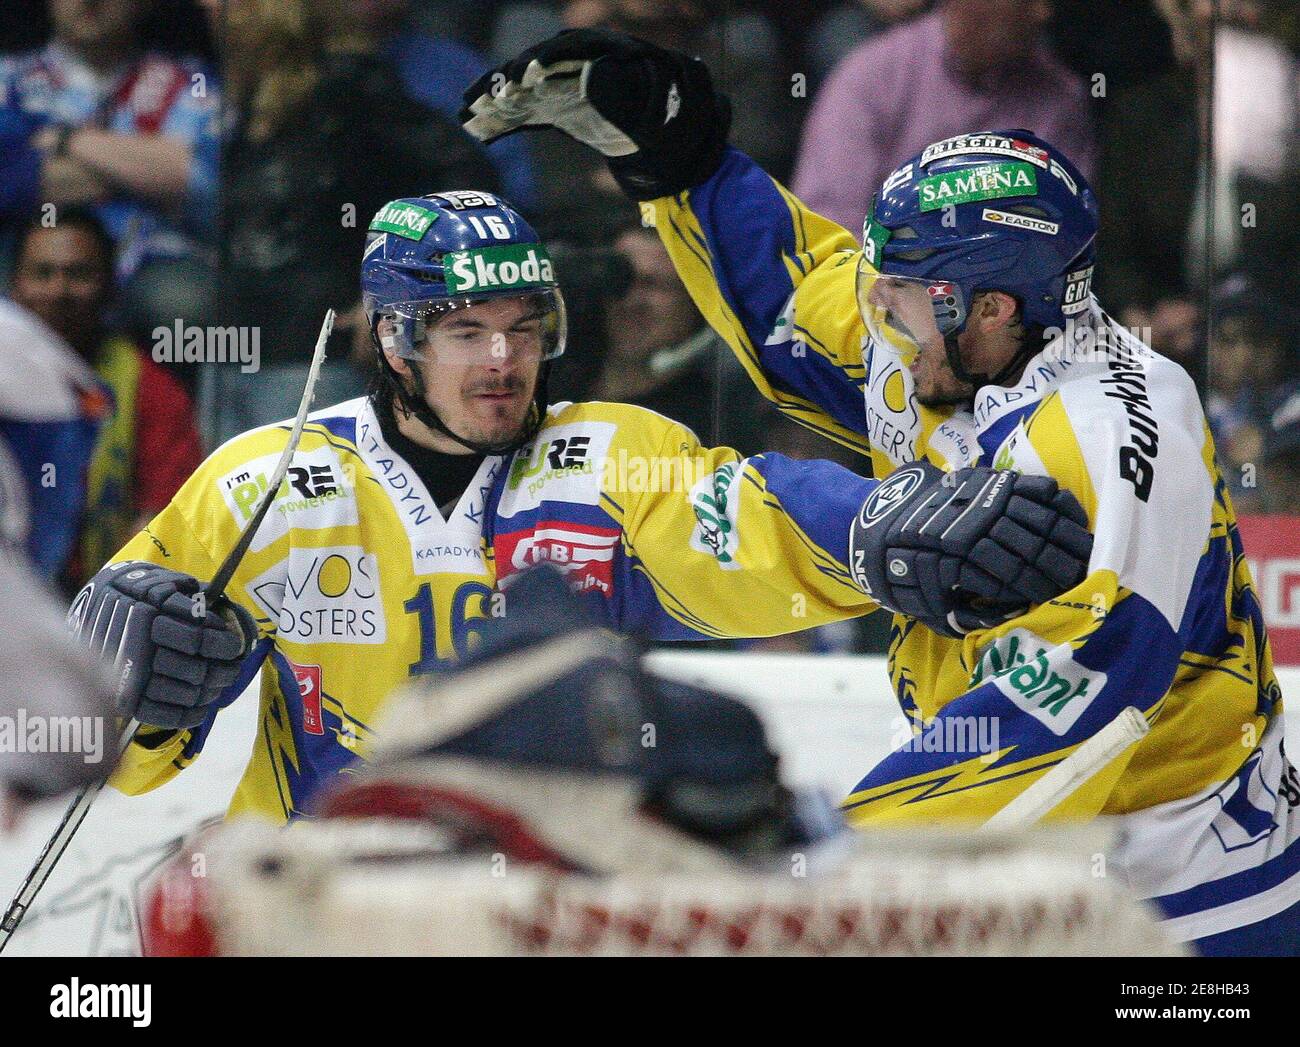 HC Davos Florian Blatter (L) and Petr Sykora react after scoring against ZSC Lions during their Swiss ice hockey play-off final game in Kloten, near Zurich, April 13, 2009.     REUTERS/Miro Kuzmanovic (SWITZERLAND SPORT ICE HOCKEY) Stock Photo